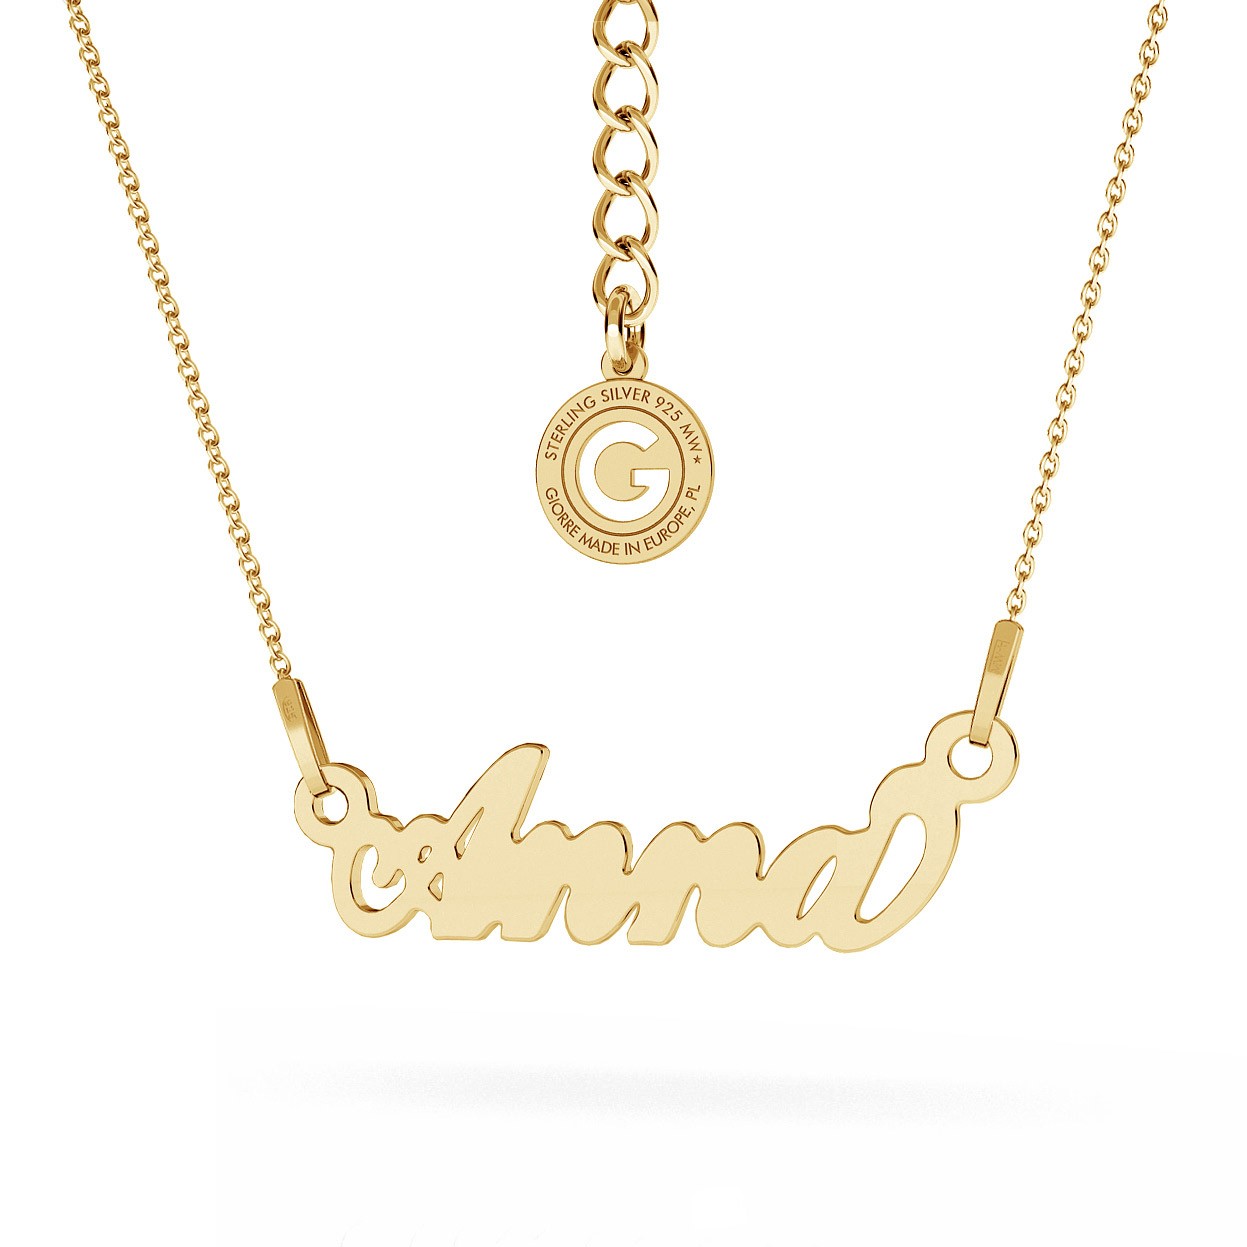 CARRIE STYLE NAME NECKLACE, RHODIUM OR 24K / 18K GOLD PLATED